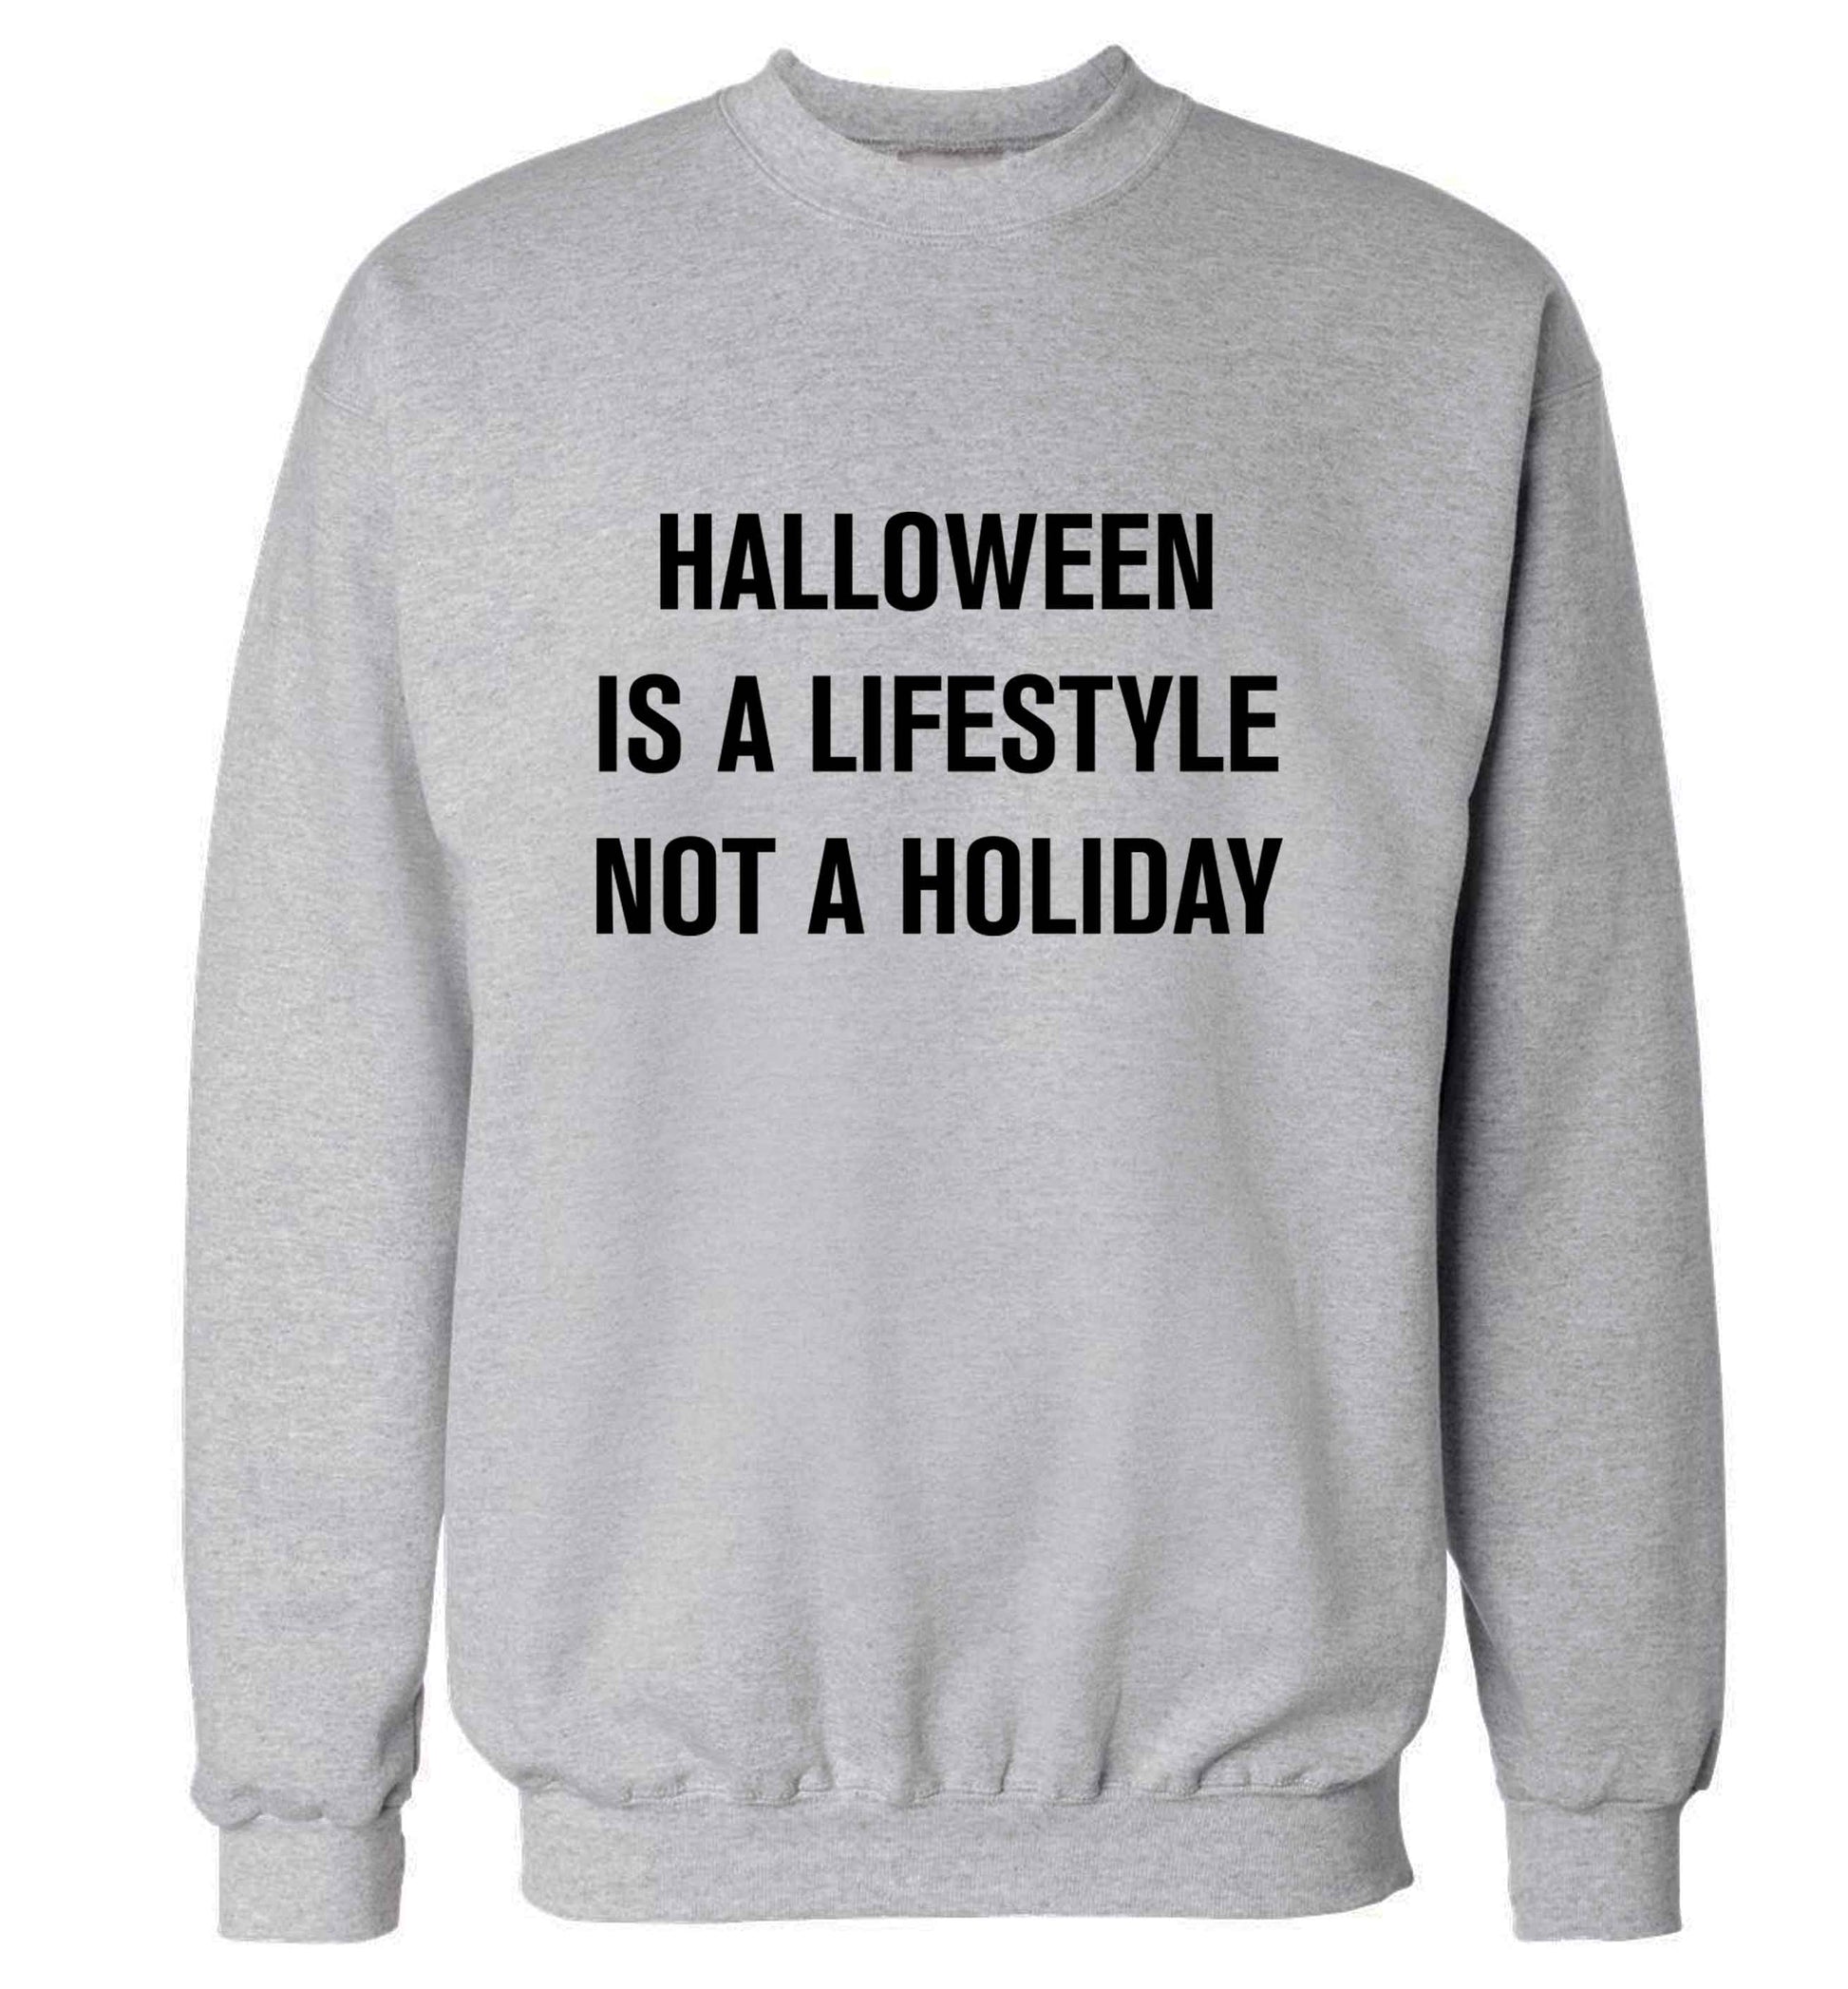 Halloween is a lifestyle not a holiday adult's unisex grey sweater 2XL